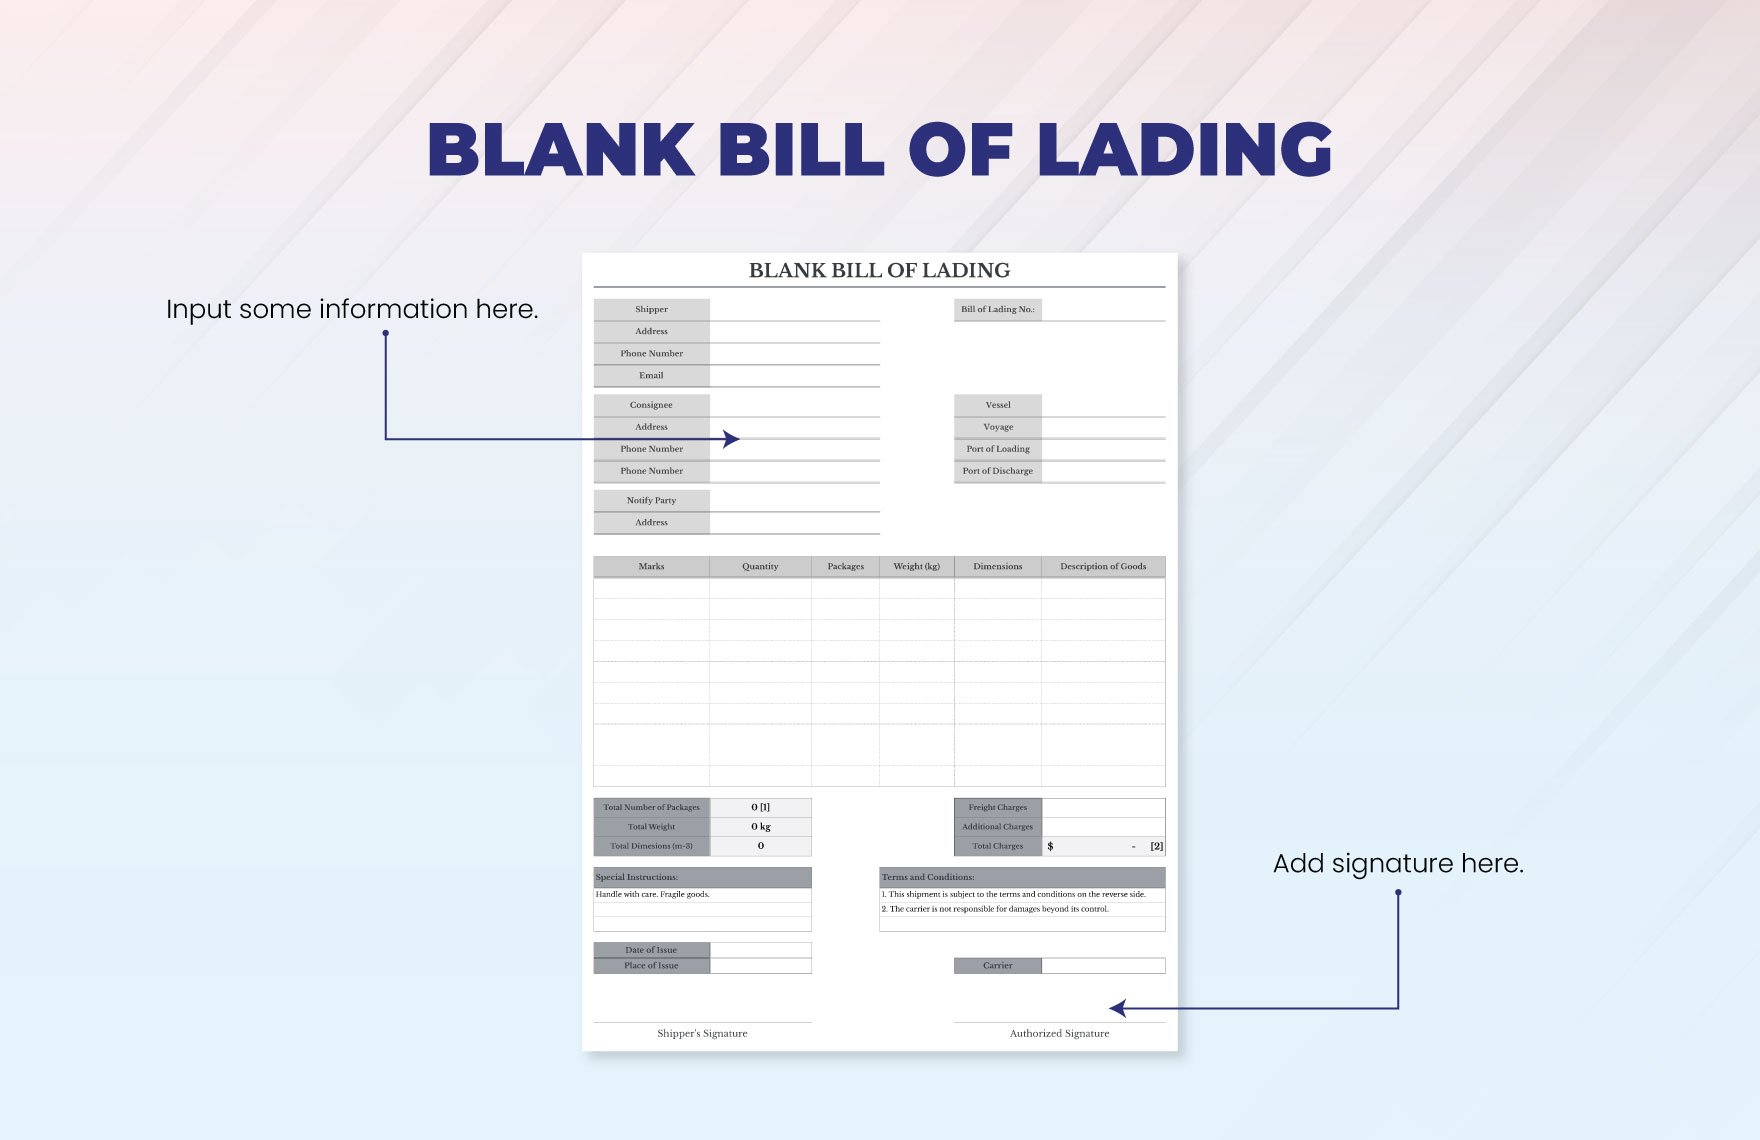 Blank Bill of Lading Template